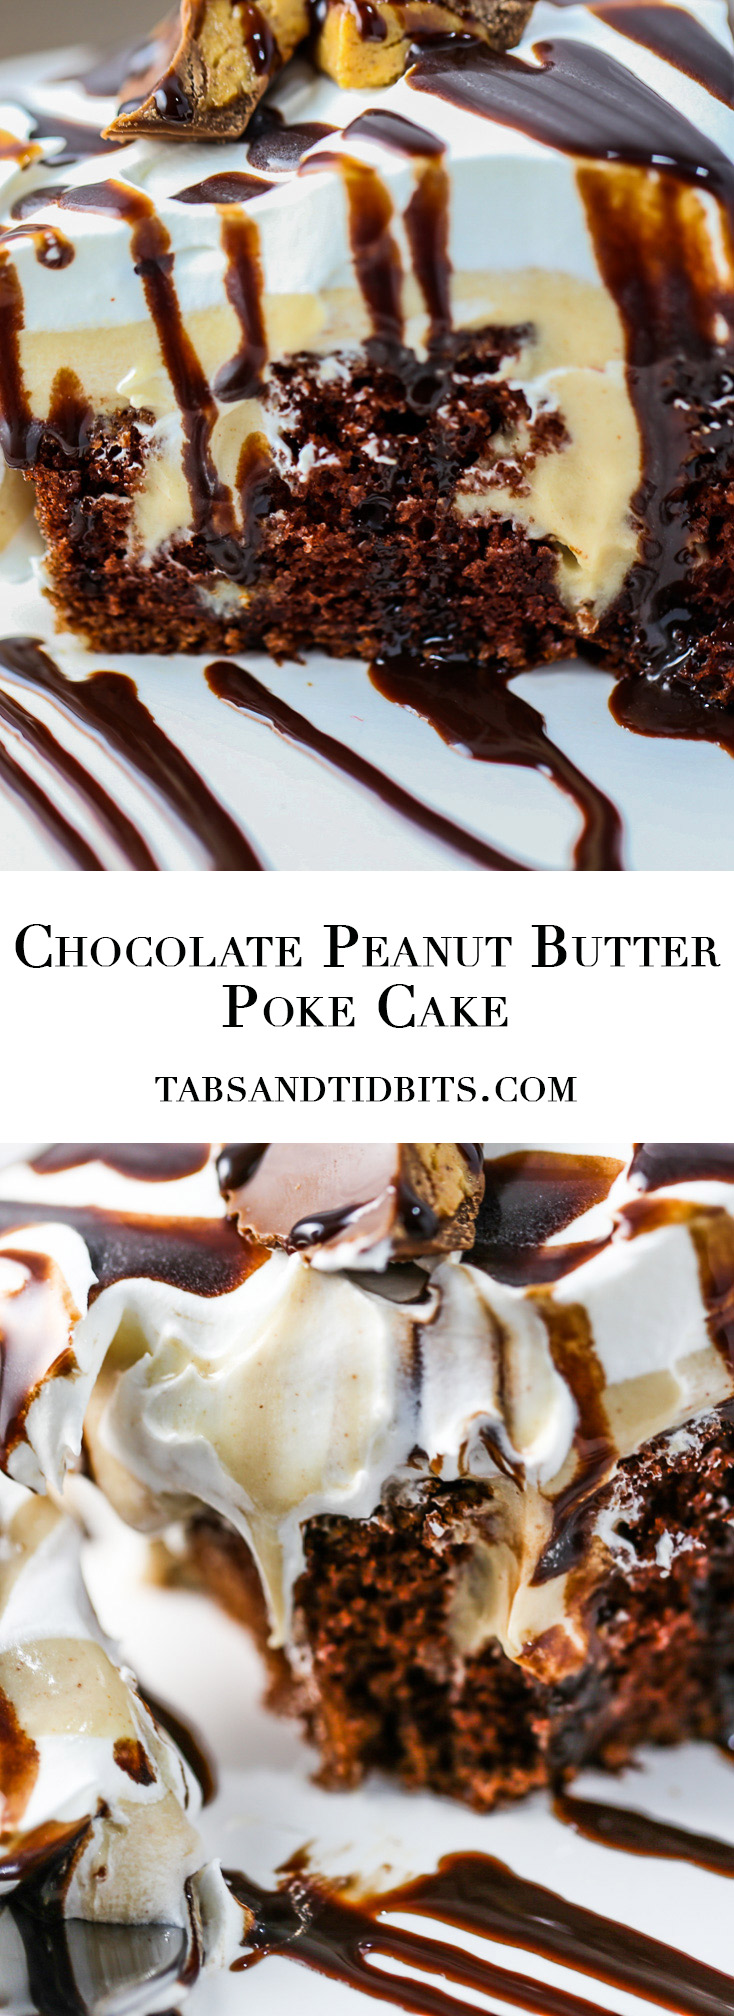 Chocolate Peanut Butter Poke Cake - A moist and creamy poke cake that will satisfy all chocolate and peanut lovers in one heaping bite!